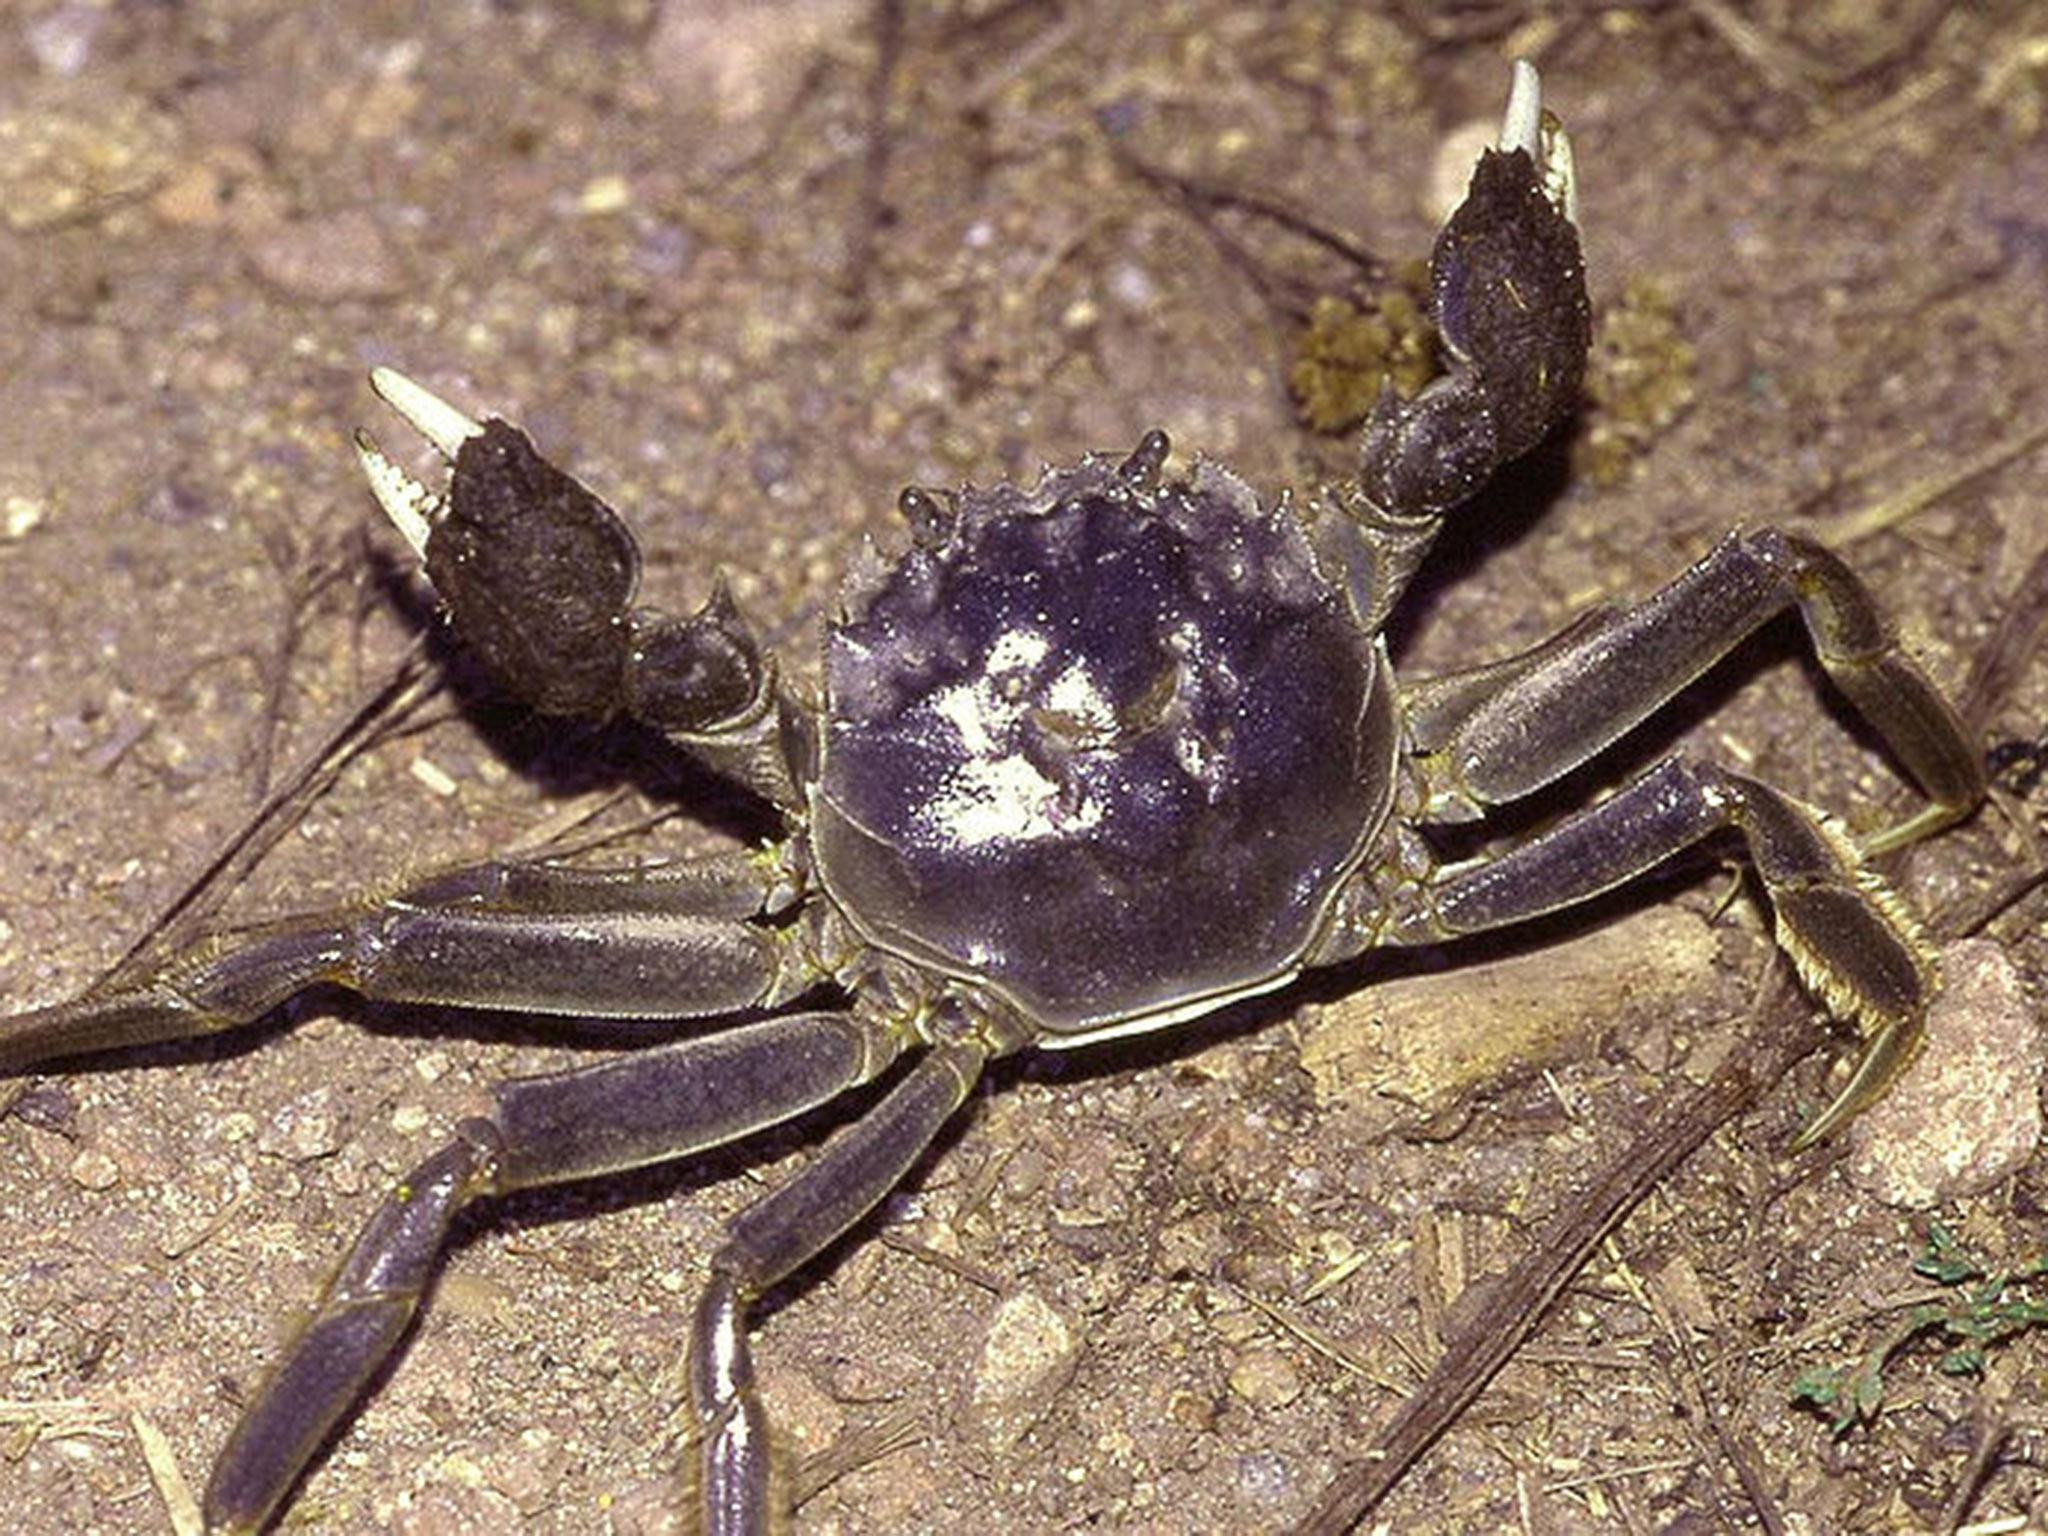 Chinese mitten crabs burrow into river banks, affecting their integrity and so can cause considerable damage